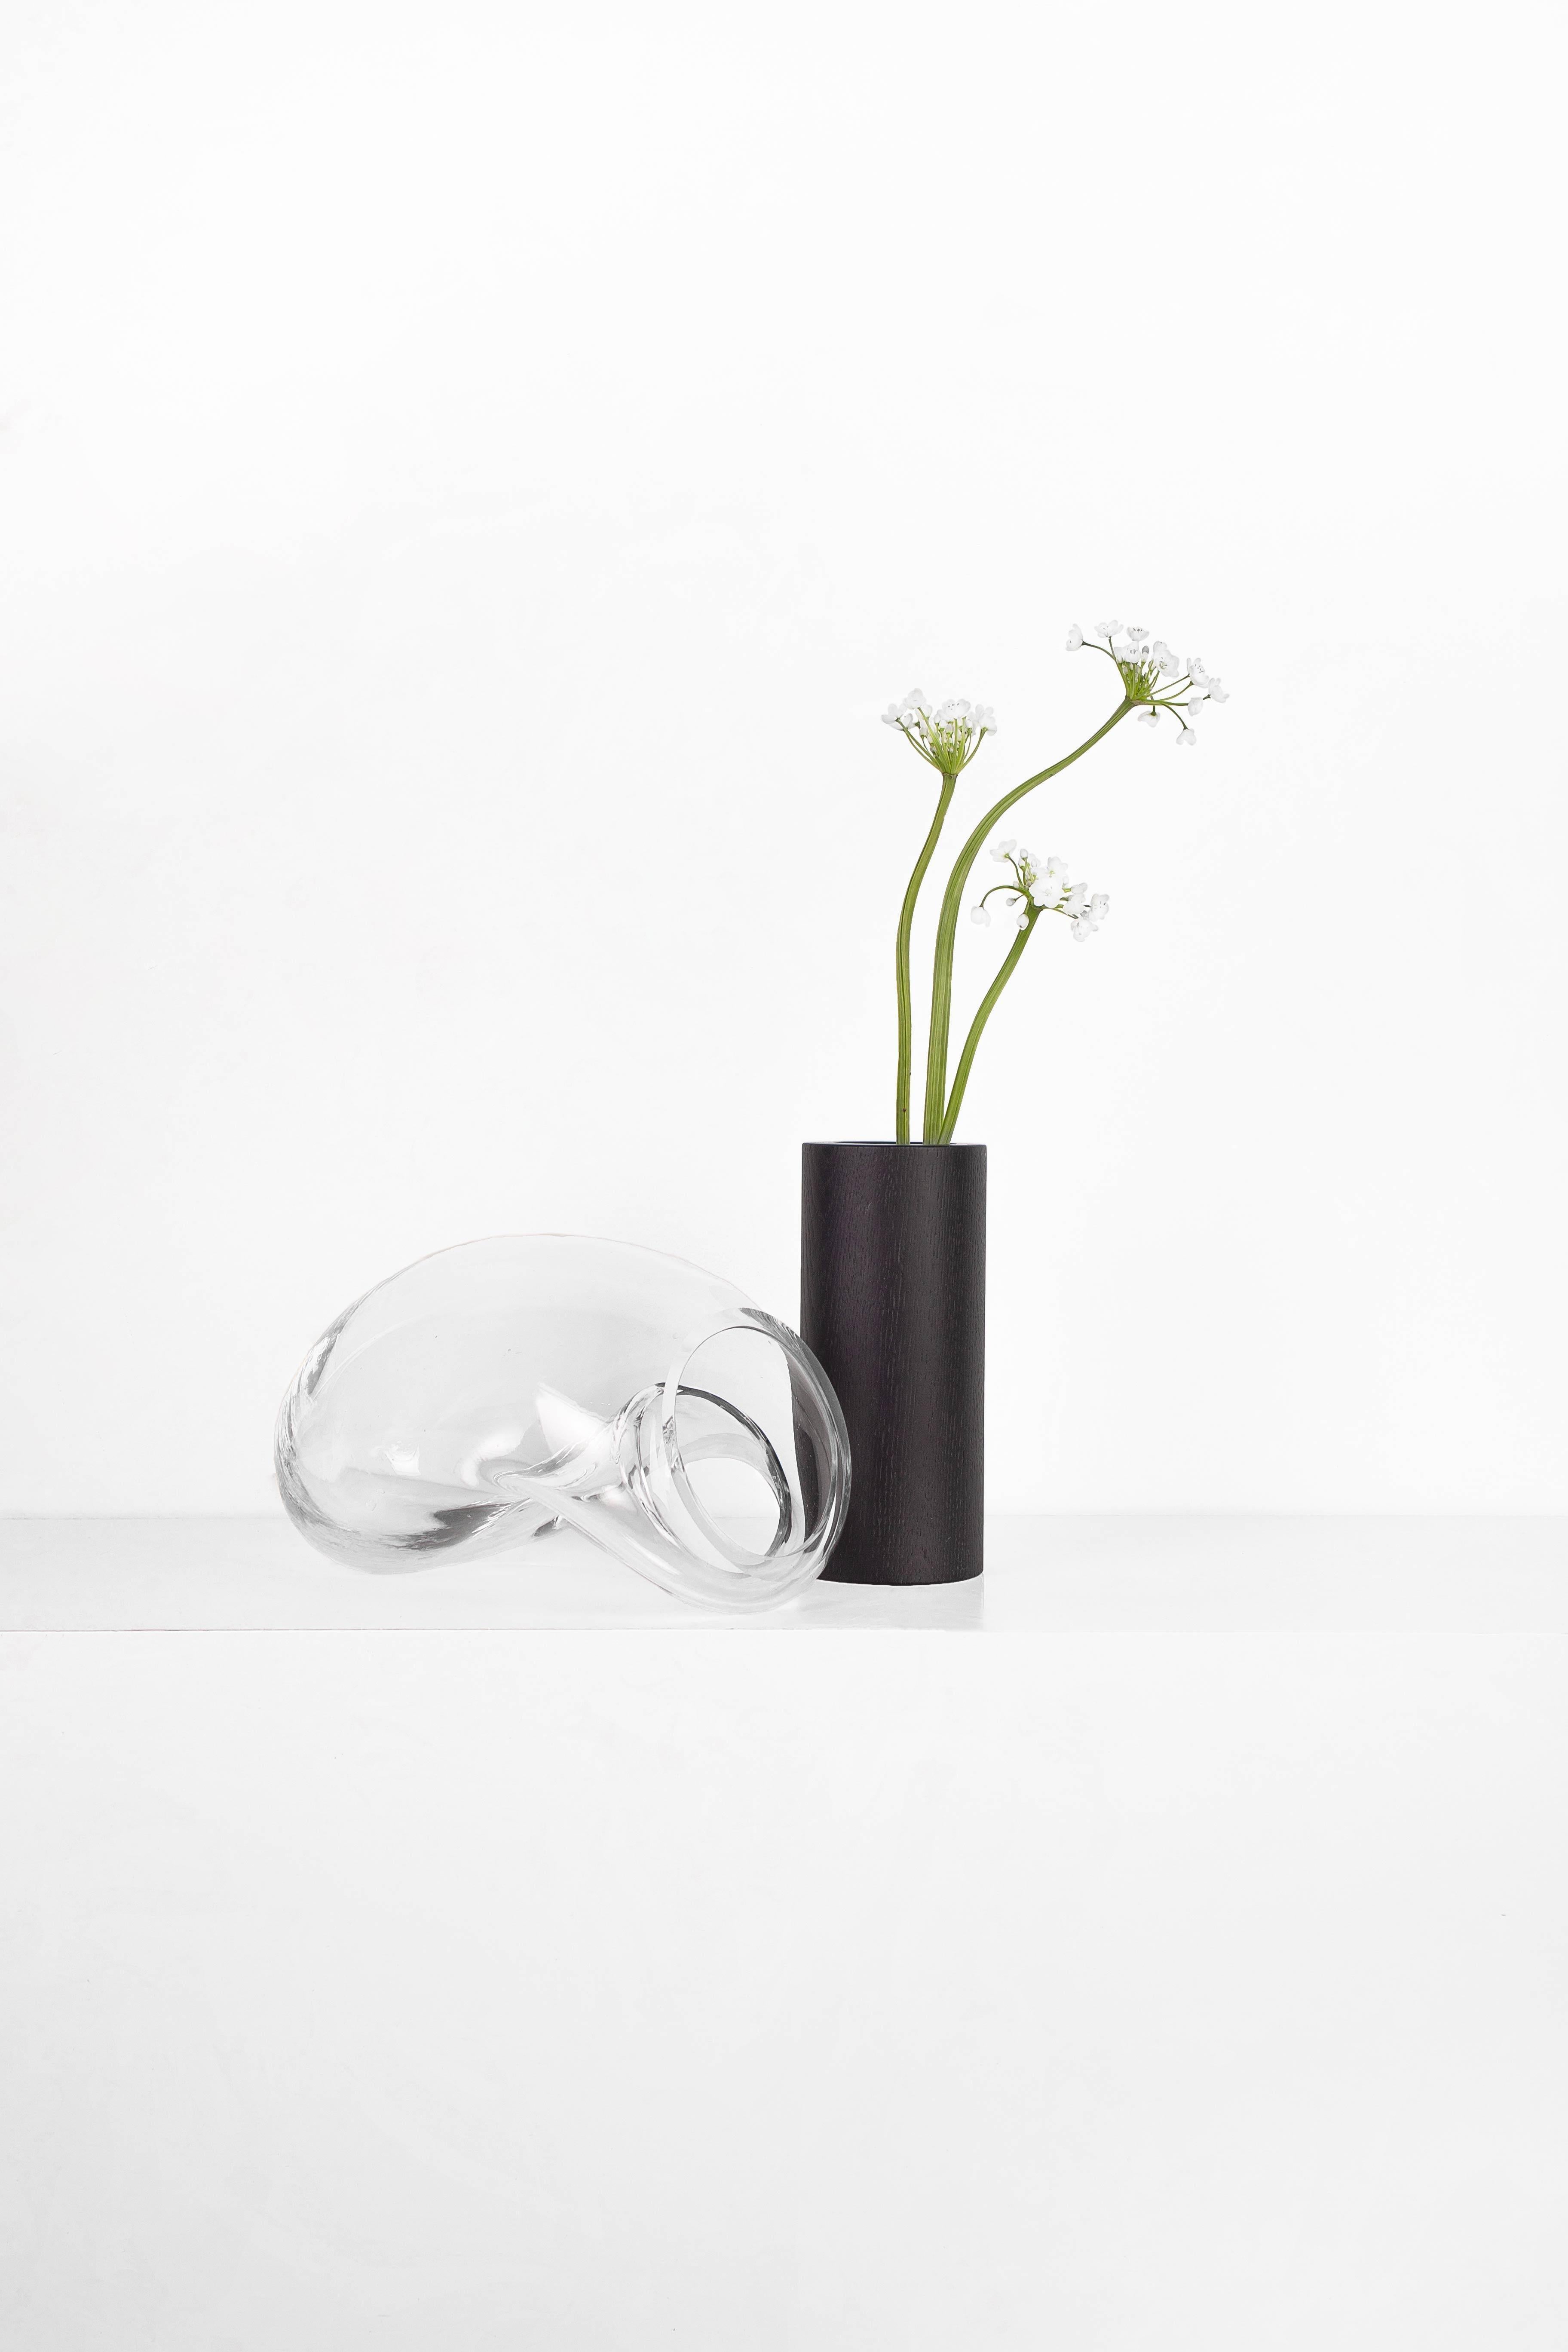 Hand-Crafted Contemporary Vase 'Gutta Boon CS1' by Noom, Large, Blown Glass and Oak Base For Sale